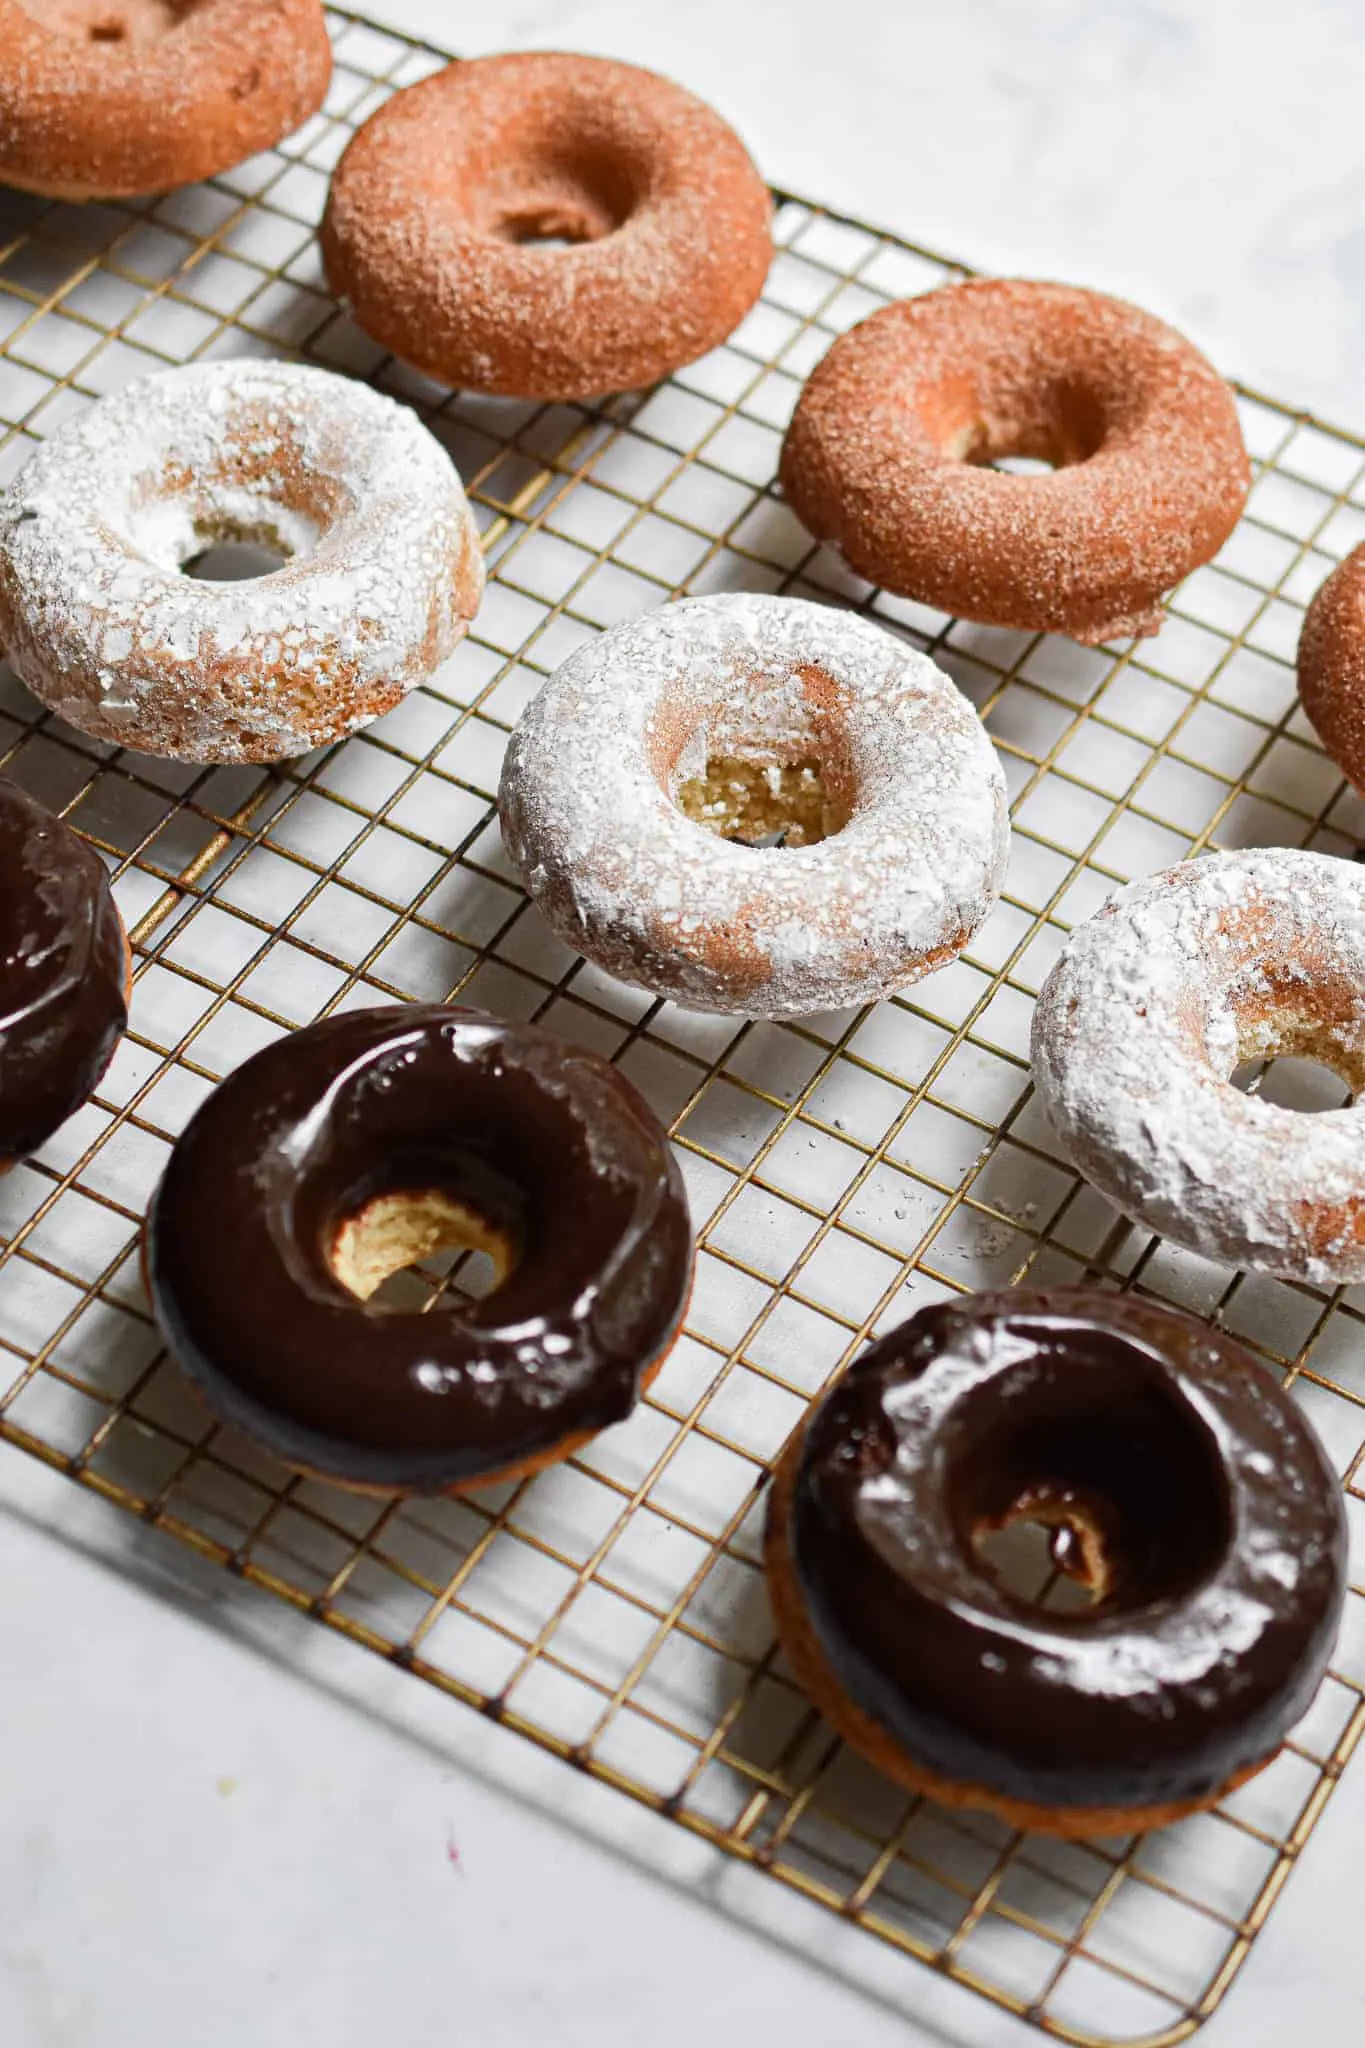 Baked Donuts with Sourdough